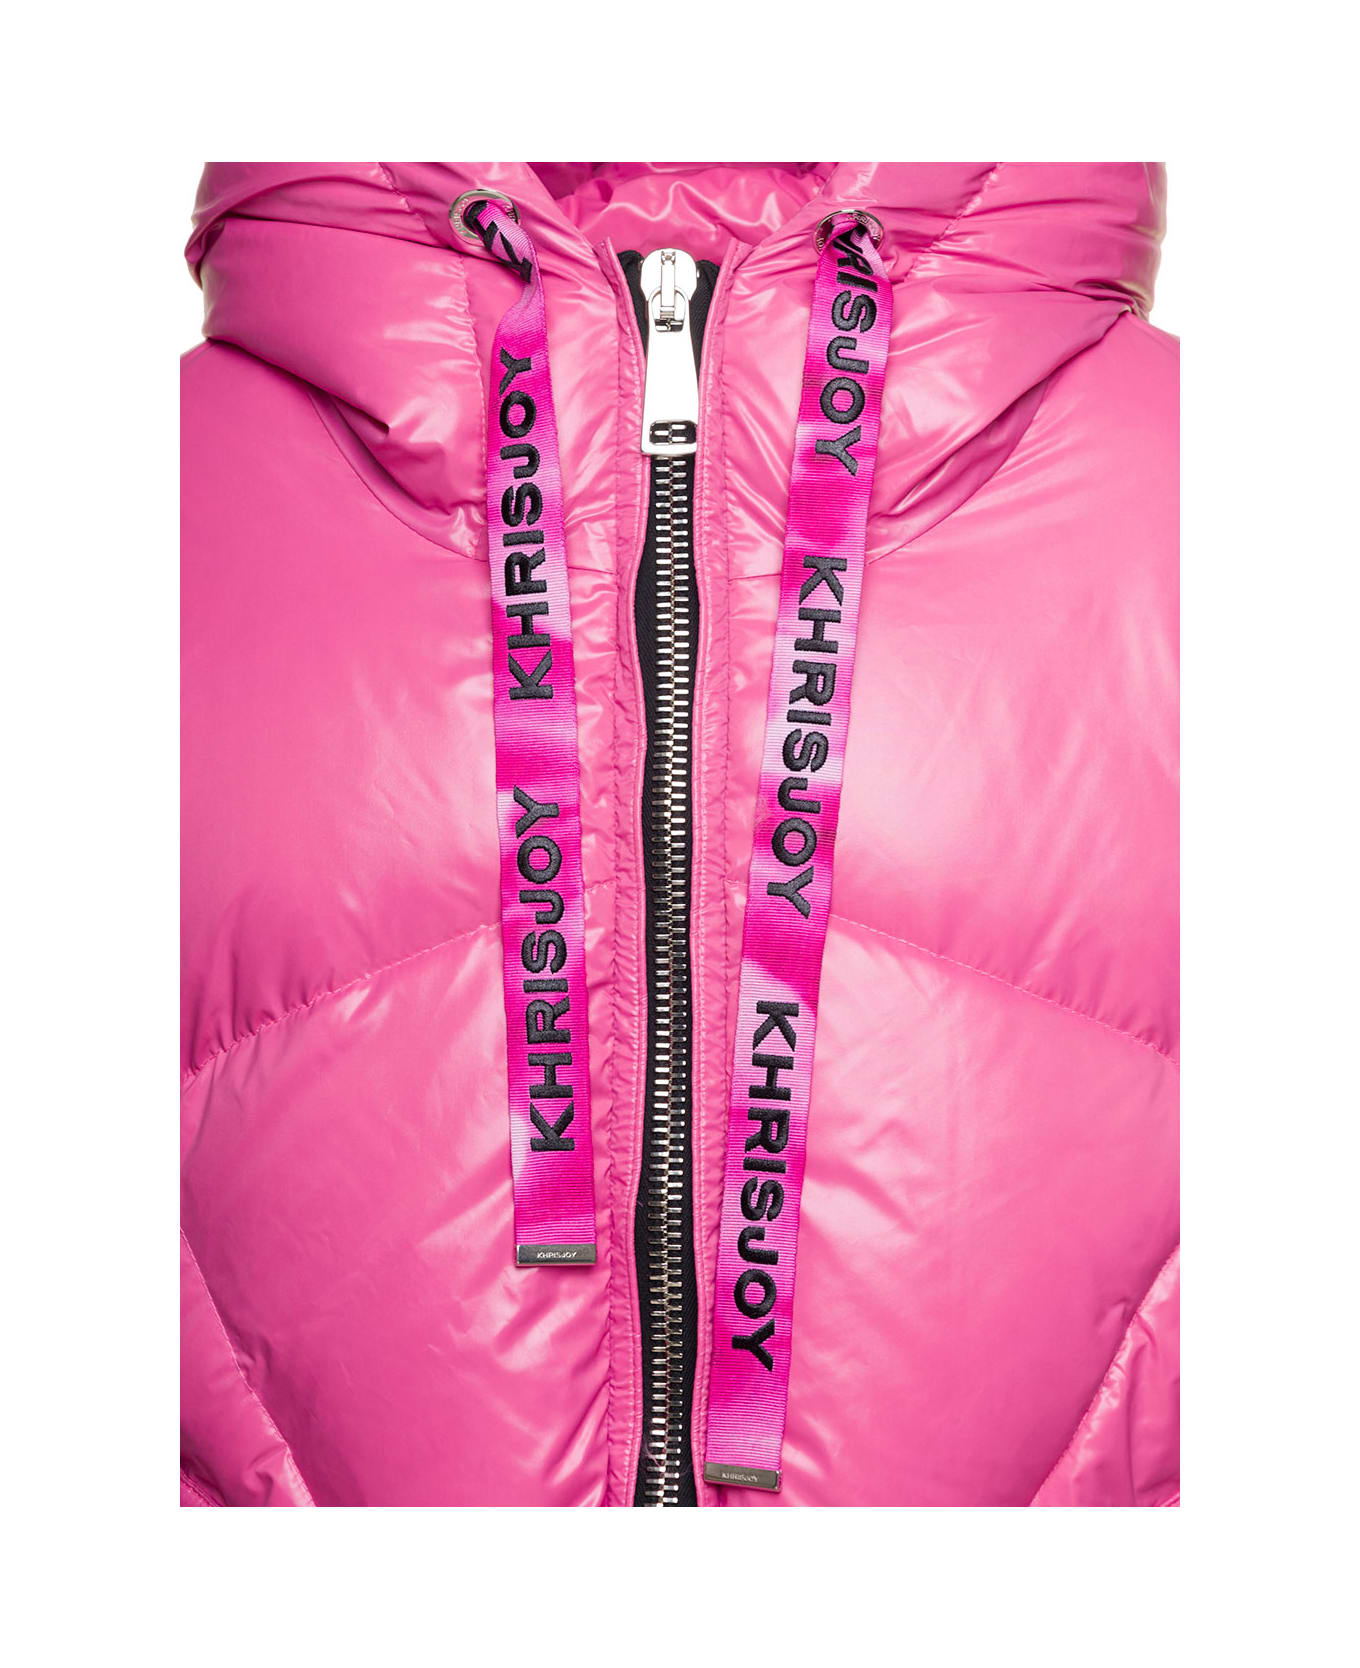 Khrisjoy Pink 'puff Khris Iconic' Oversized Down Jacket With Hood In Polyester Woman - Pink